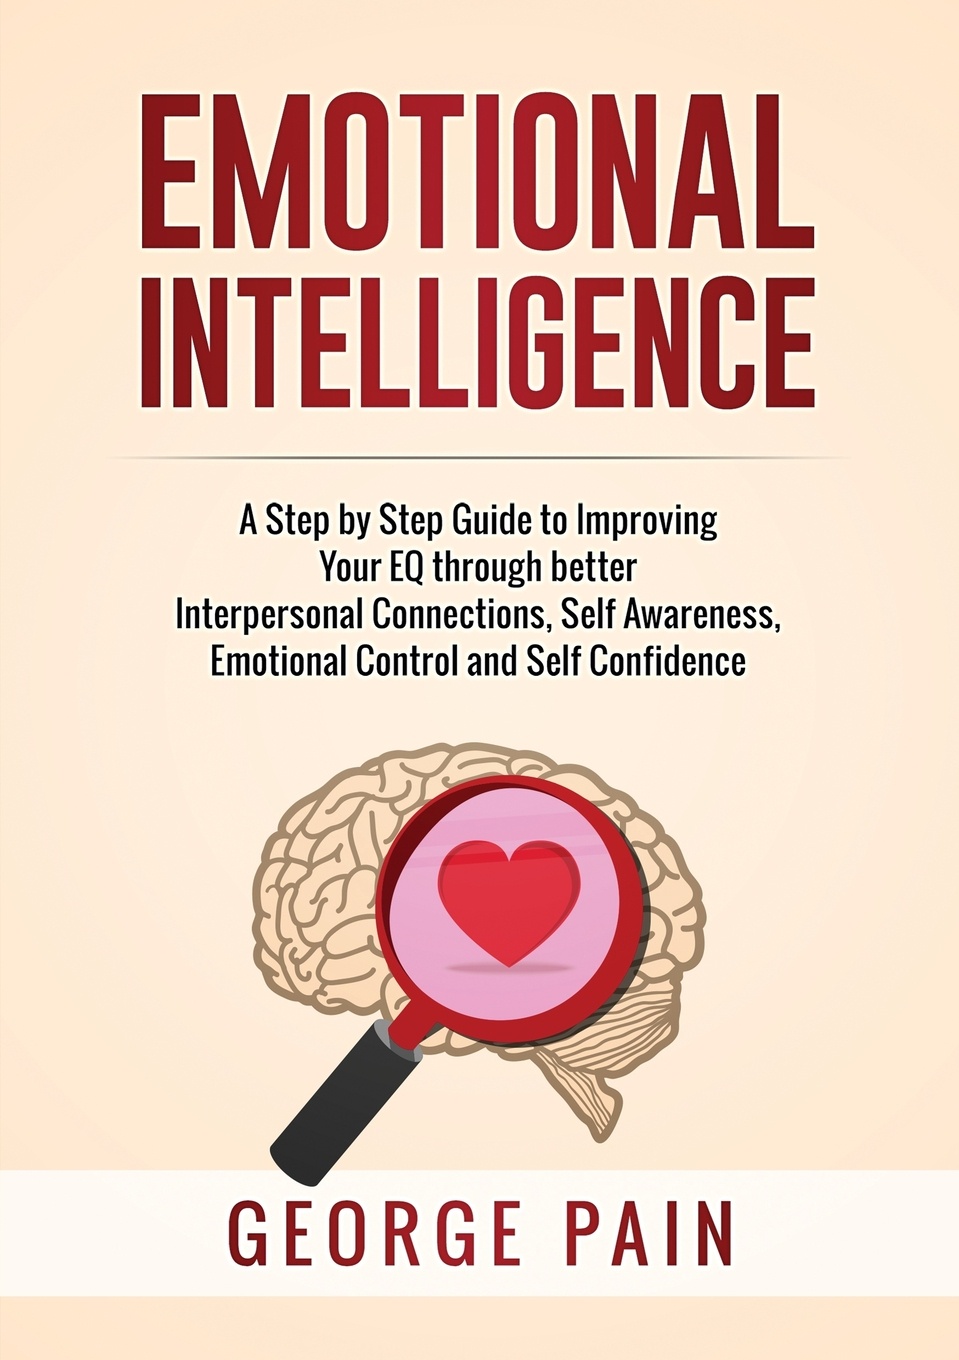 Emotional Intelligence. A Practical Guide to Improving Your EQ through better Interpersonal Connections, Self Awareness, Emotional Control and Self Confidence